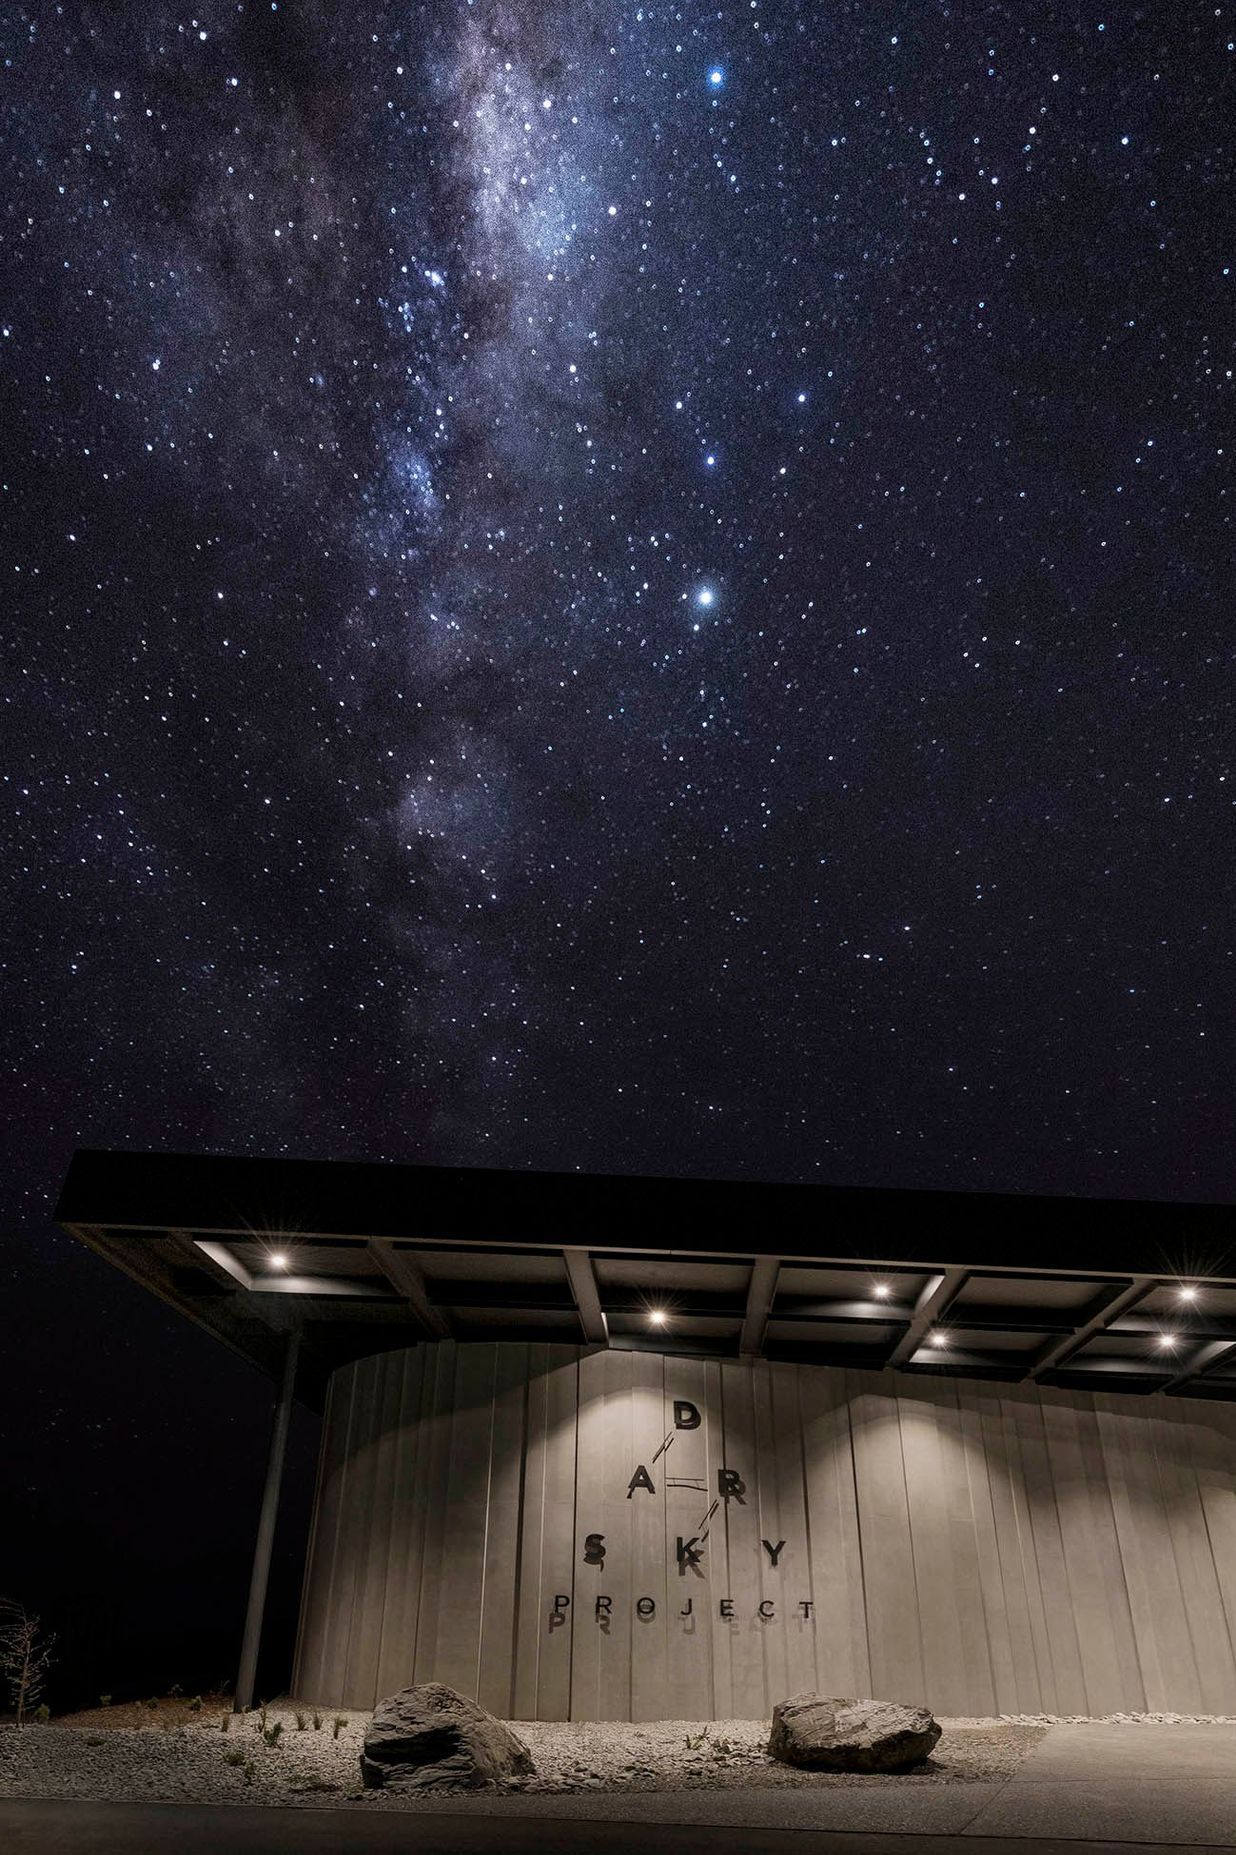 An incredible view of the star-lit night sky over the Dark Sky Project.